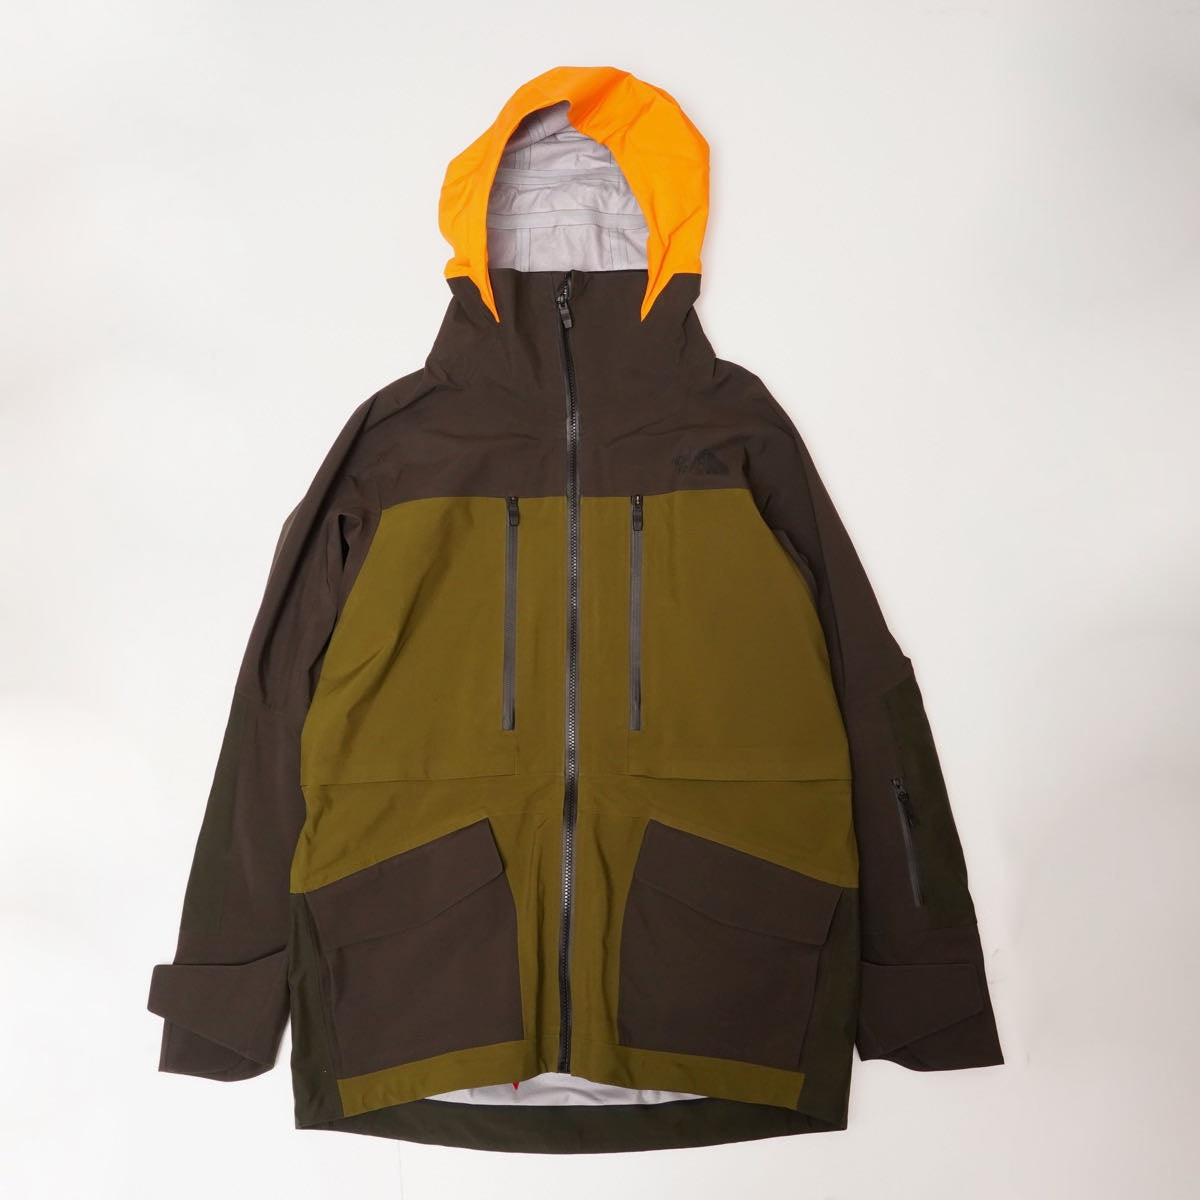 【MEN】The North Face STEEP SERIES